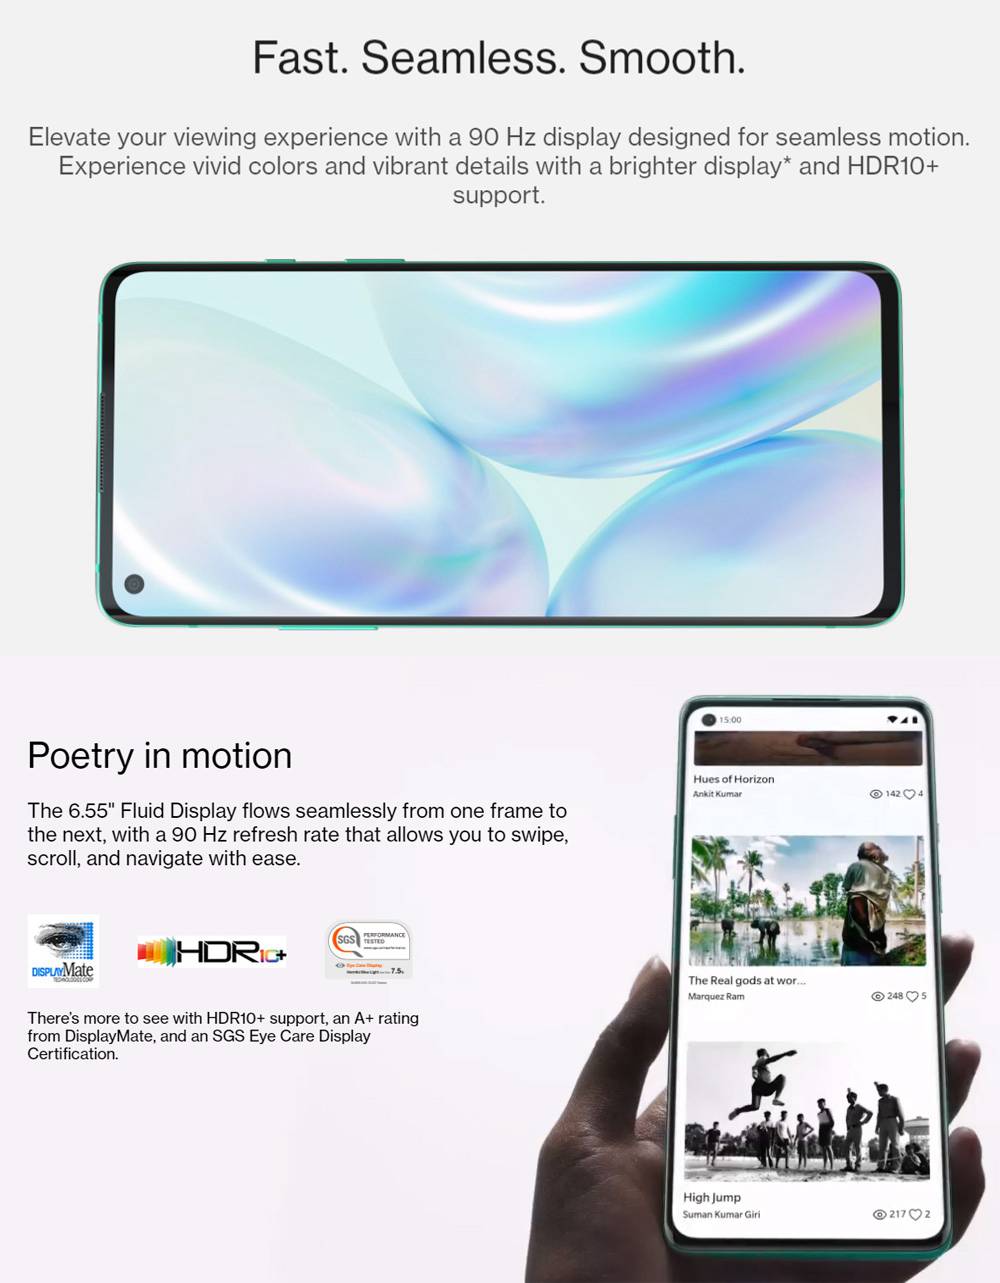 OnePlus 8 6.55 Inch Screen 5G Smartphone Qualcomm Snapdragon 865 Octa Core 8GB RAM 128GB ROM Android 10.0 Dual SIM Dual Standby Global ROM - Glacial Green